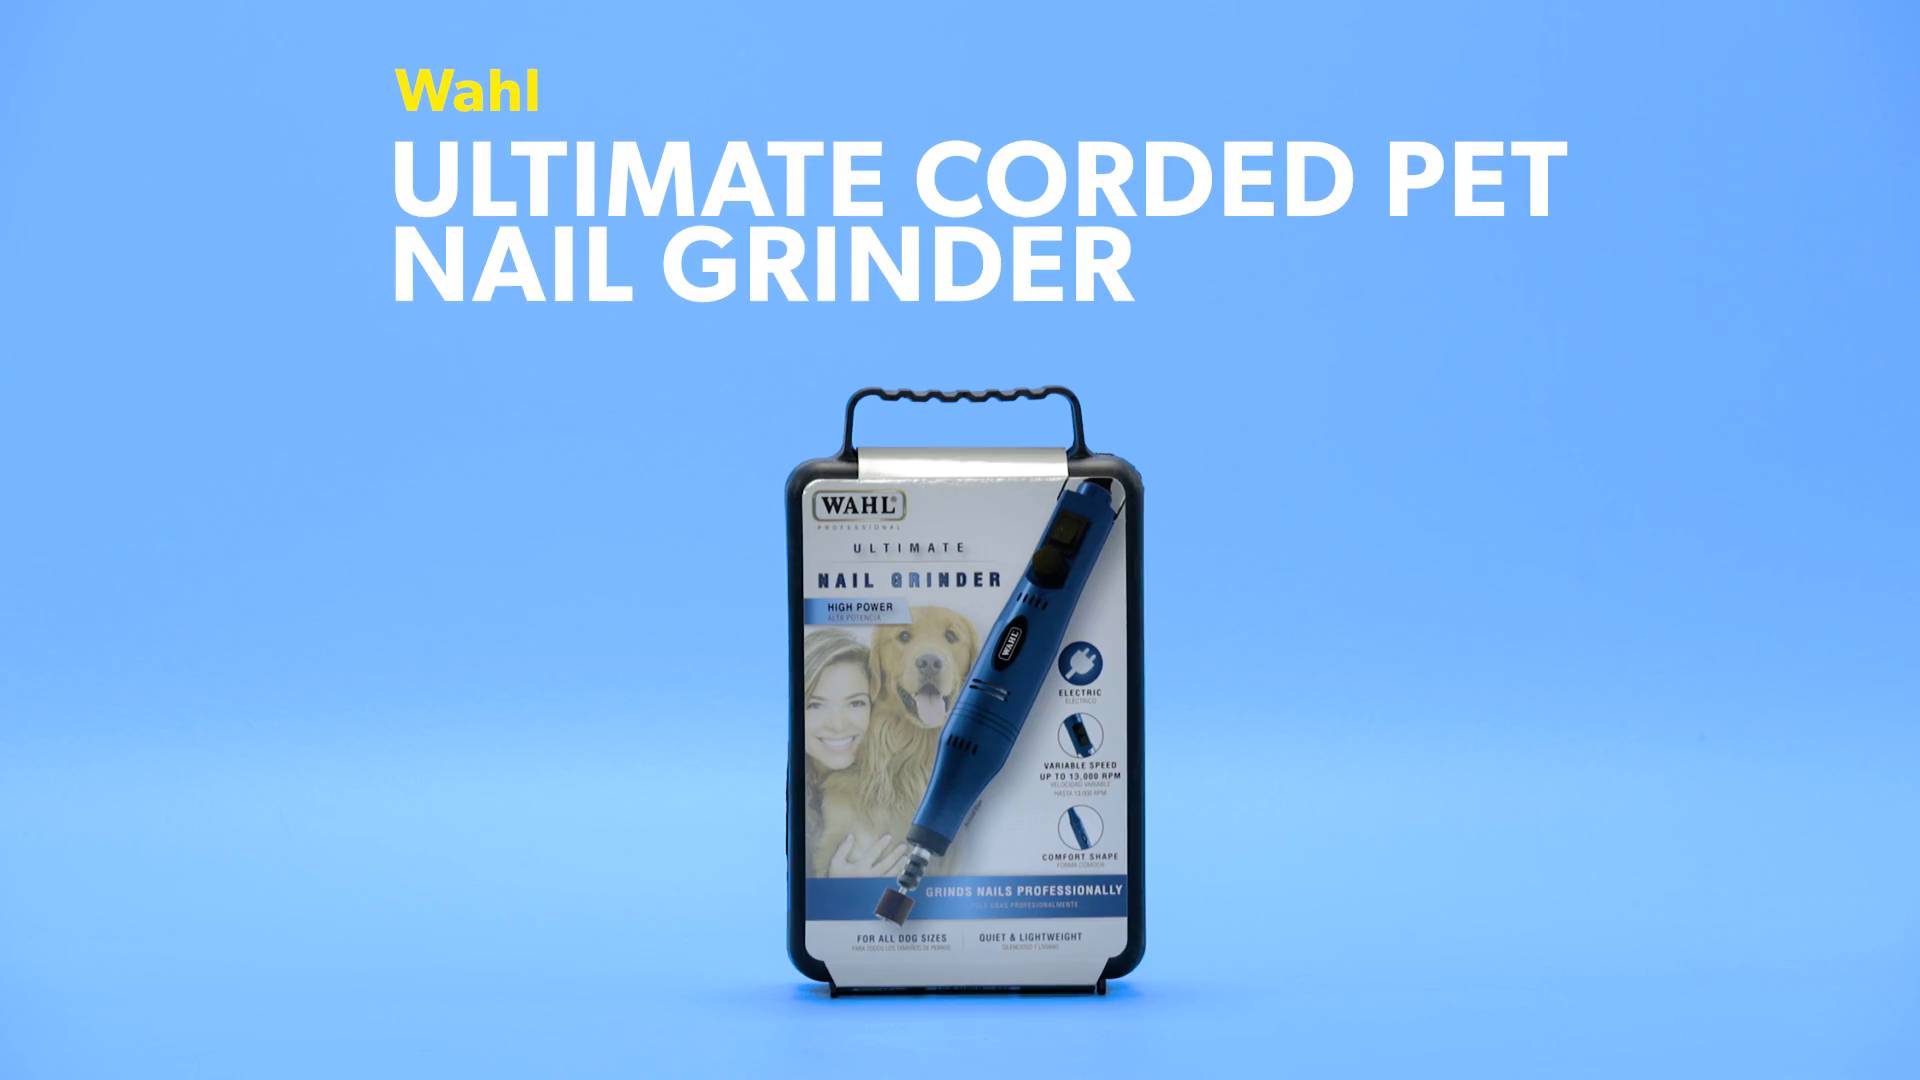 WAHL ULTIMATE NAIL GRINDER  YouTube